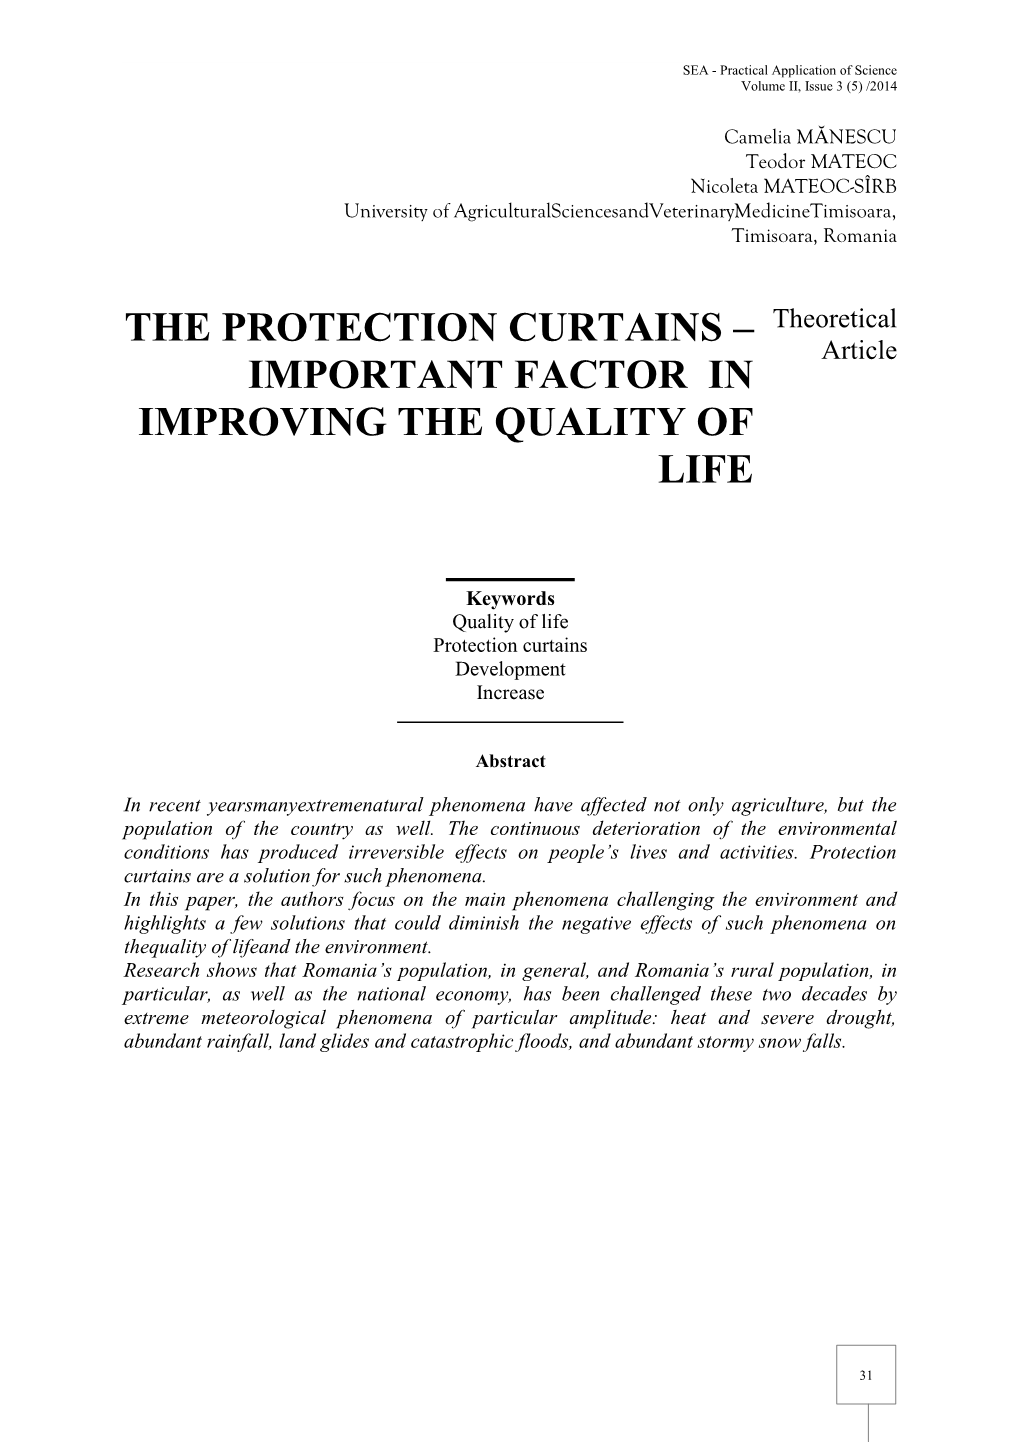 THE PROTECTION CURTAINS Theoretical – Article IMPORTANT FACTOR in IMPROVING the QUALITY of LIFE